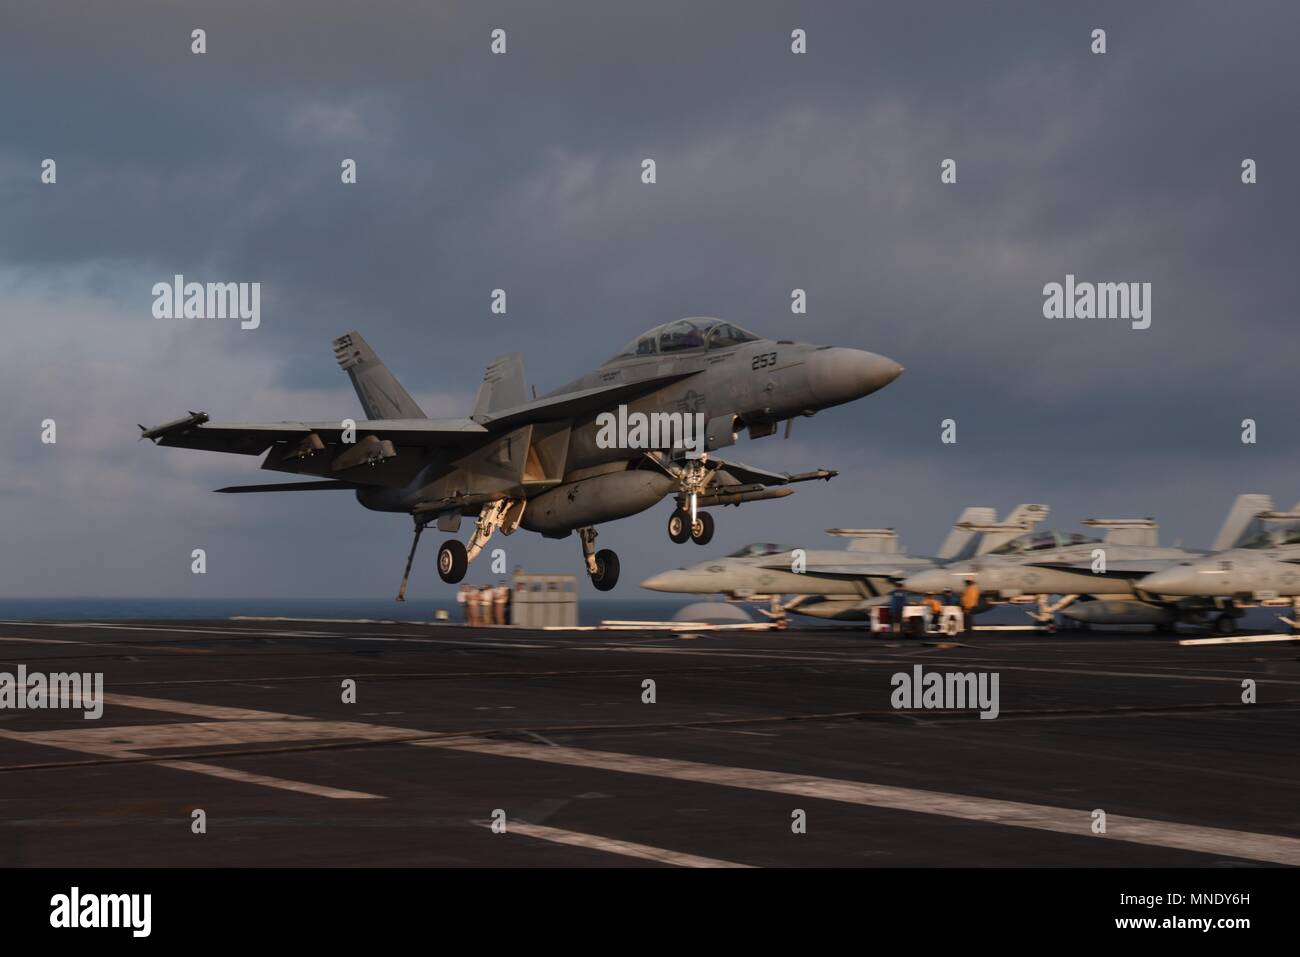 180513-N-NQ487-0453 MEDITERRANEAN SEA (May 13, 2018) An F/A-18F Super Hornet assigned to the 'Fighting Checkmates' of Strike Fighter Squadron (VFA) 211 prepares to land on the flight deck of the Nimitz-class aircraft carrier USS Harry S. Truman (CVN 75), May 13, 2018. Harry S. Truman's support of Operation Inherent Resolve demonstrates the capability and flexibility of U.S. Naval Forces and their resolve to eliminate the terrorist group ISIS and the they pose. (U.S. Navy photo by Mass Communication Specialist 3rd Class Kaysee Lohmann/Released). () Stock Photo